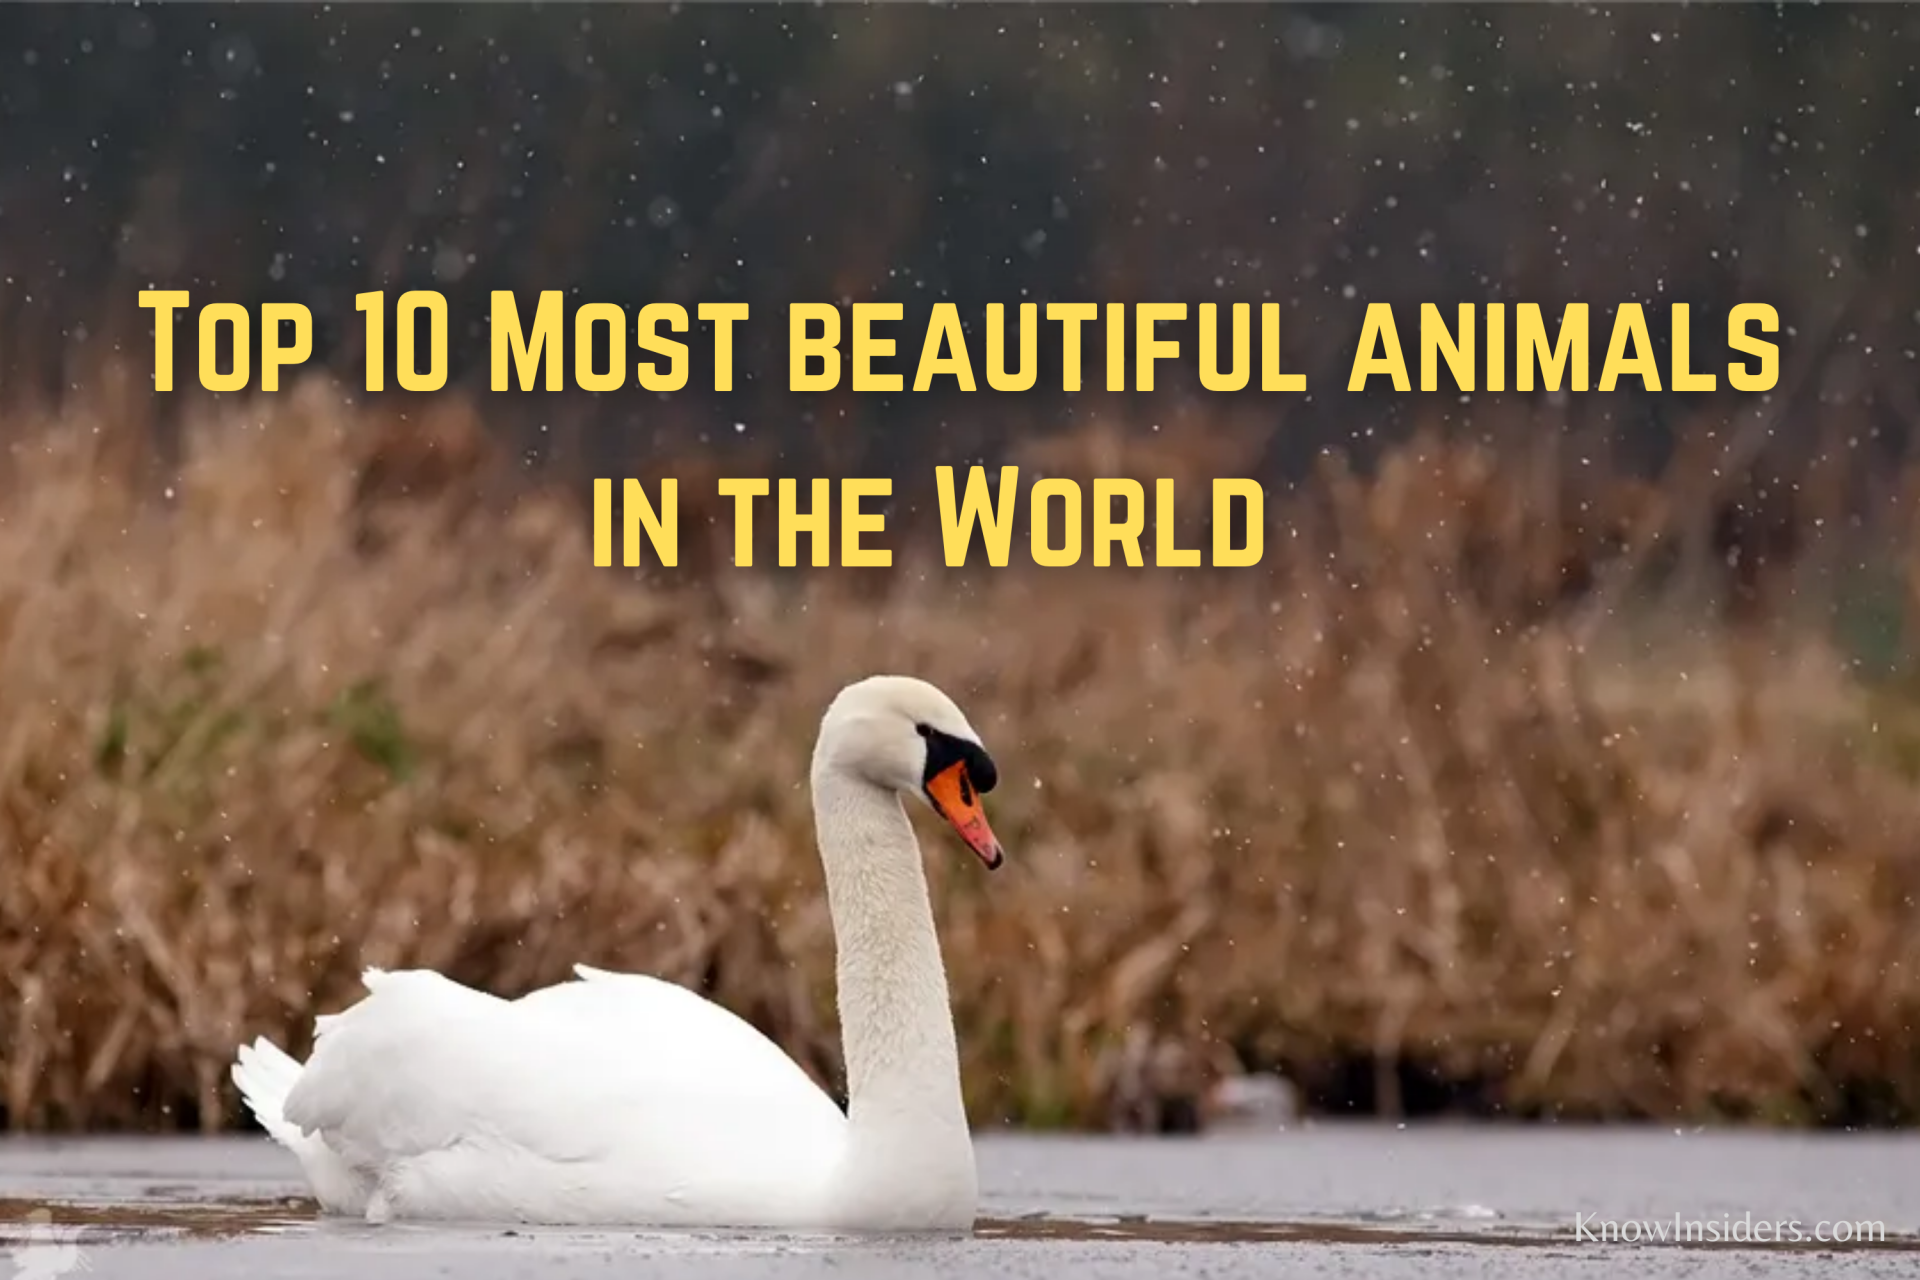 Top 10 Most Beautiful Animals in the World | KnowInsiders